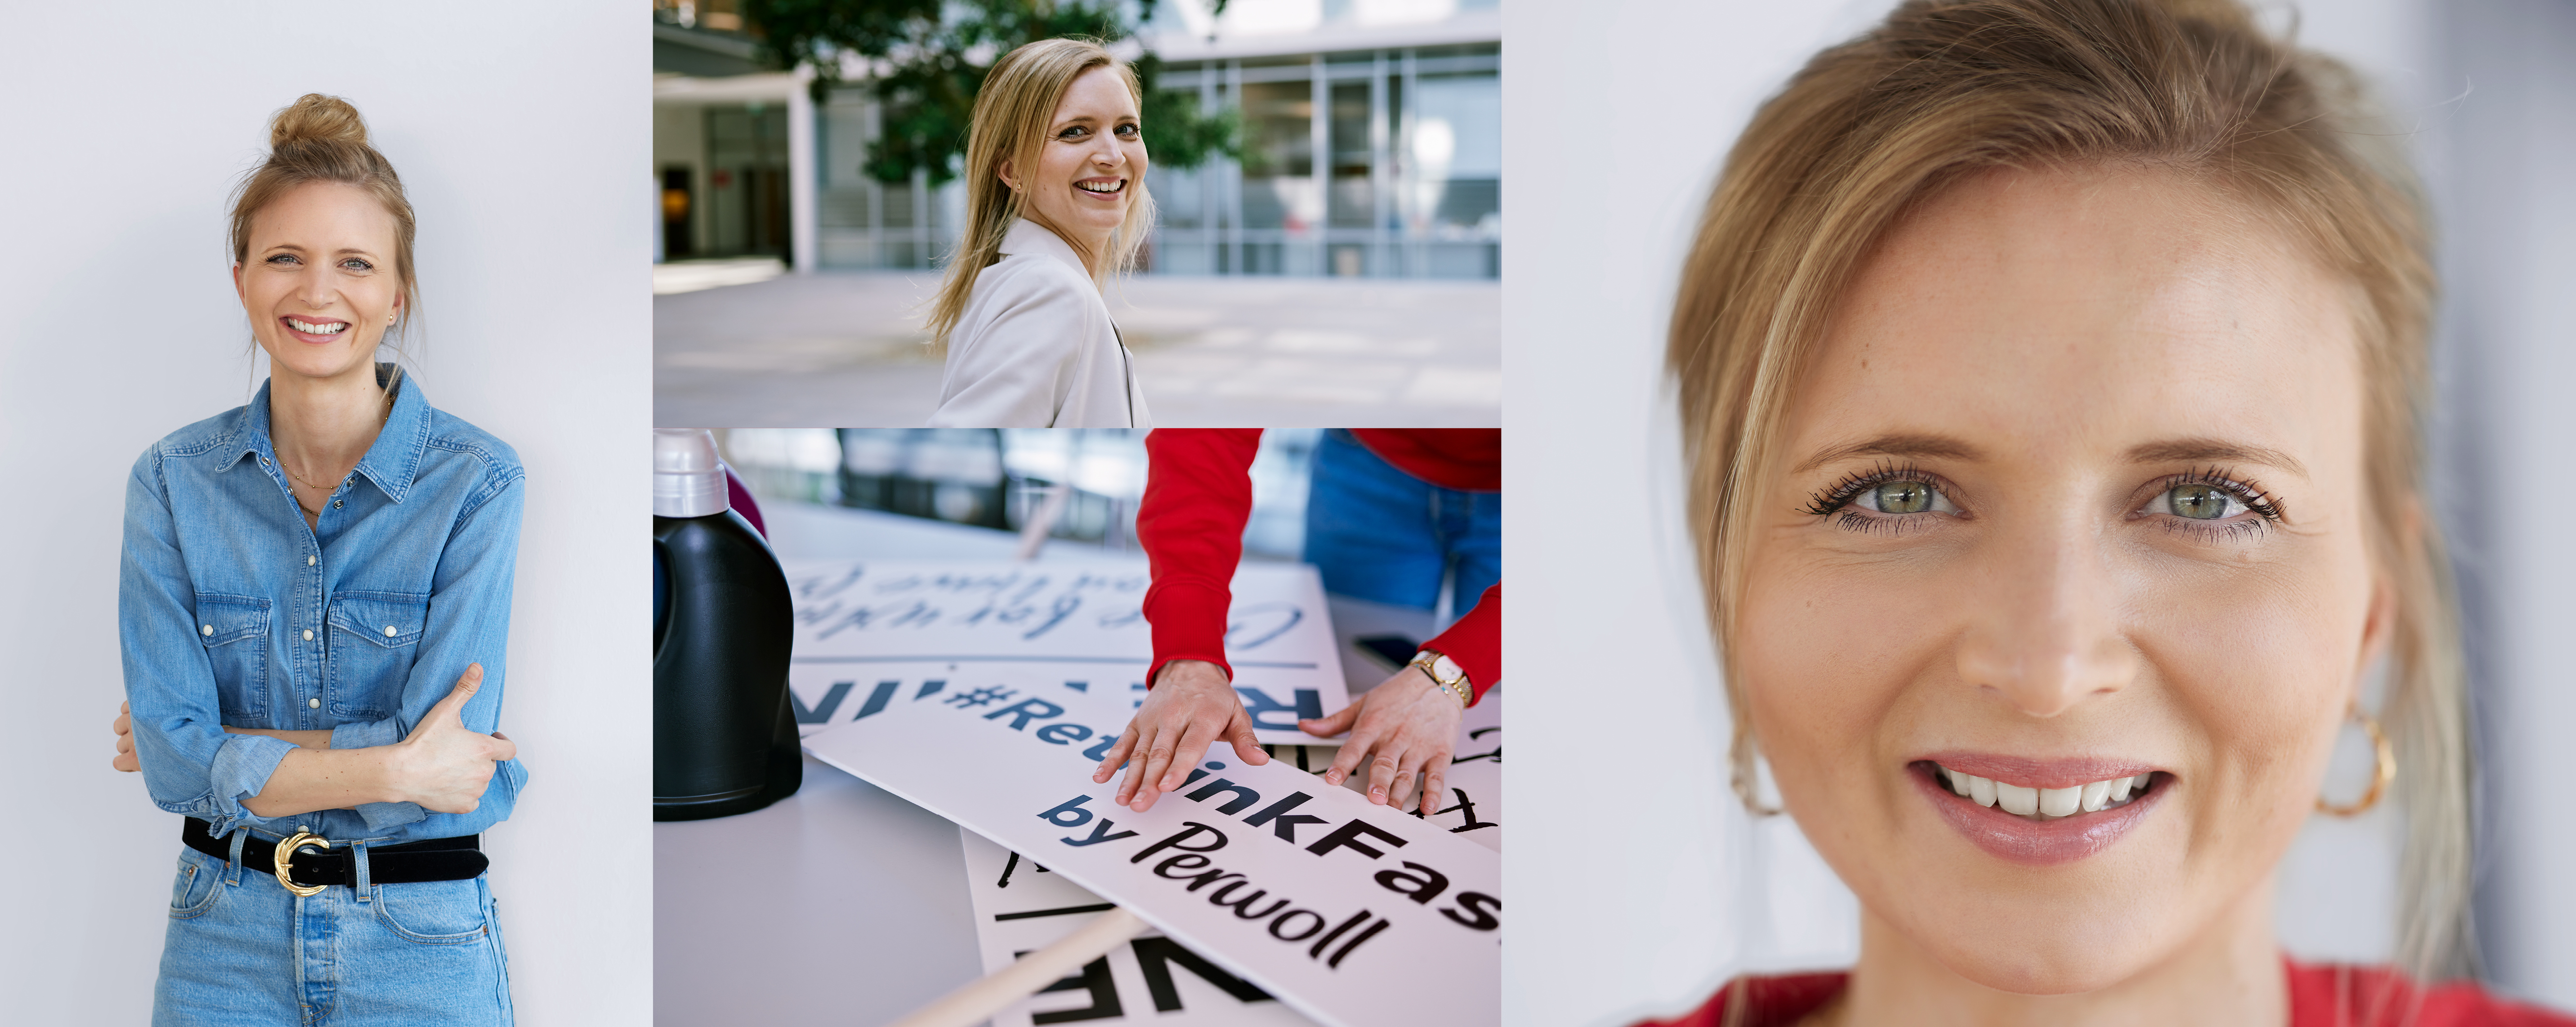 An employee of Henkel in front of her workplace. She poses for the camera, sorts signs from the #Rethink Fashion campaign by Persil, and is smiling.